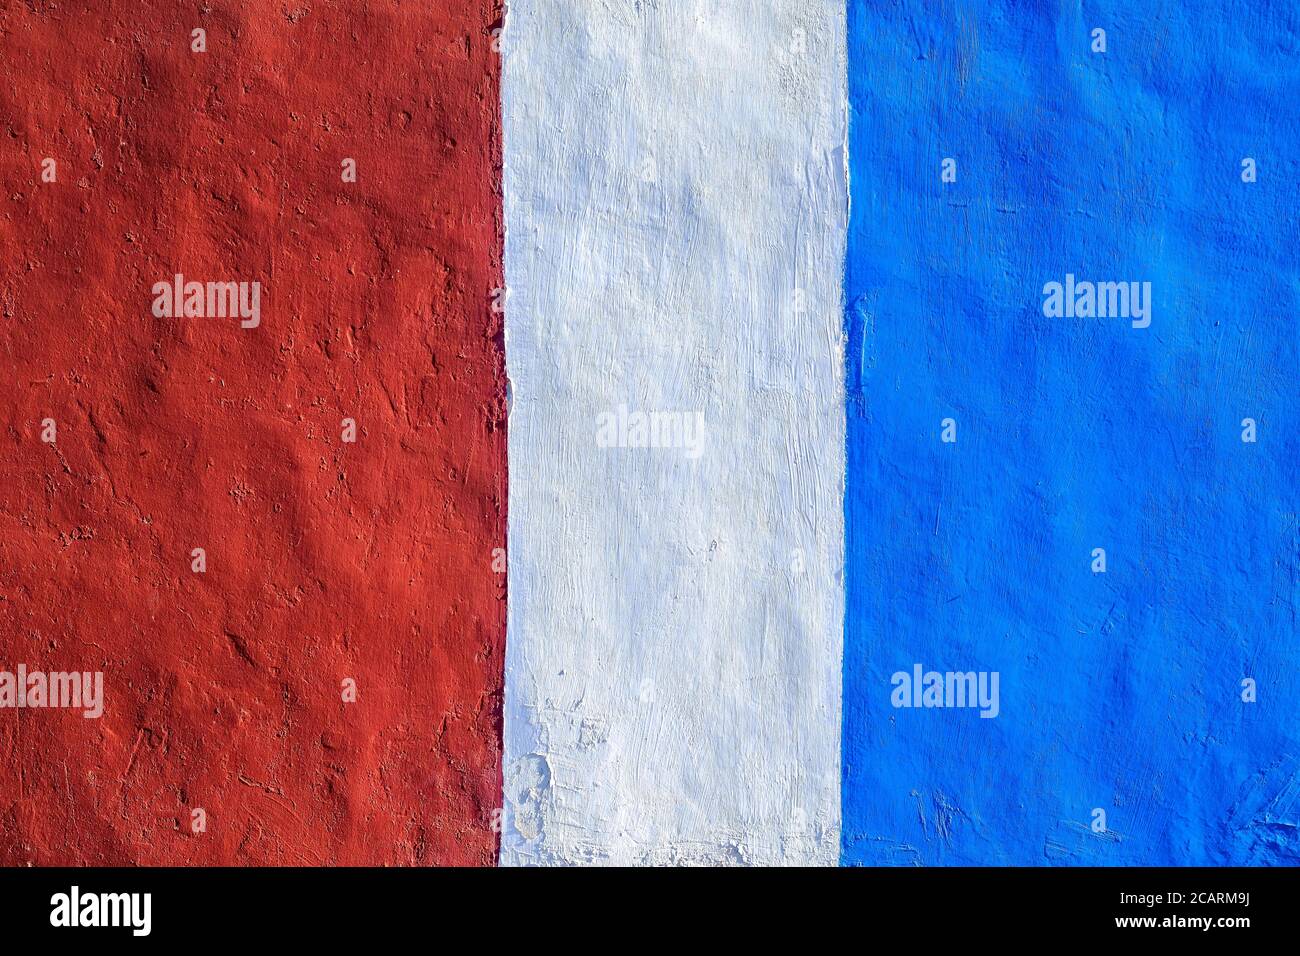 Vibrant color bands: saturated red and blue, painted surface, hard light. Stock Photo